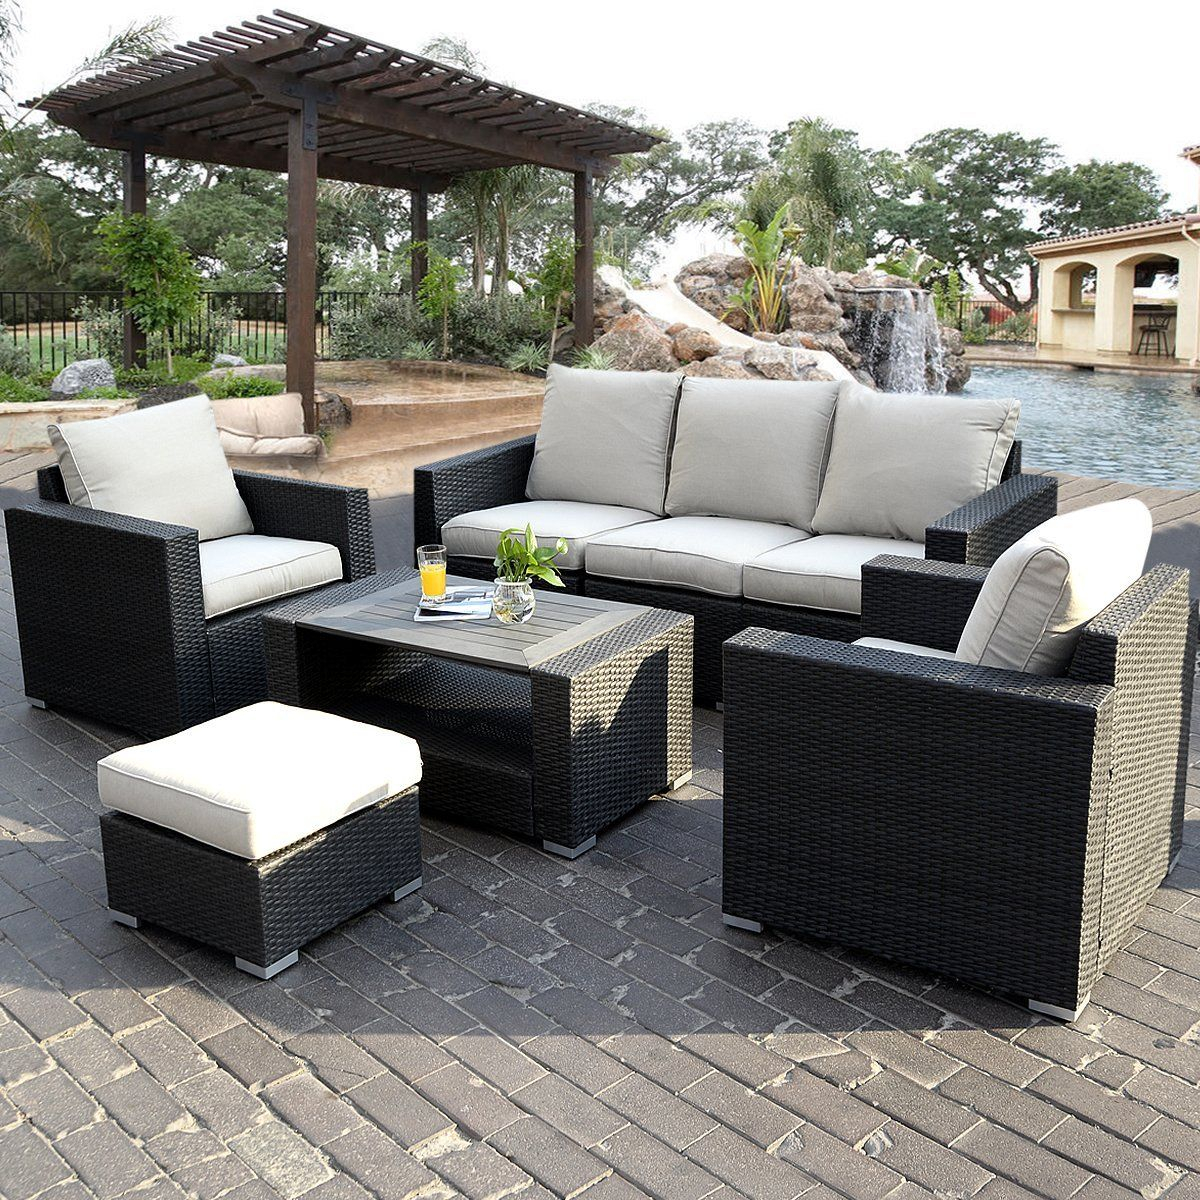 Fds 7pc Rattan Outdoor Garden Furniture Patio Corner Sofa intended for sizing 1200 X 1200